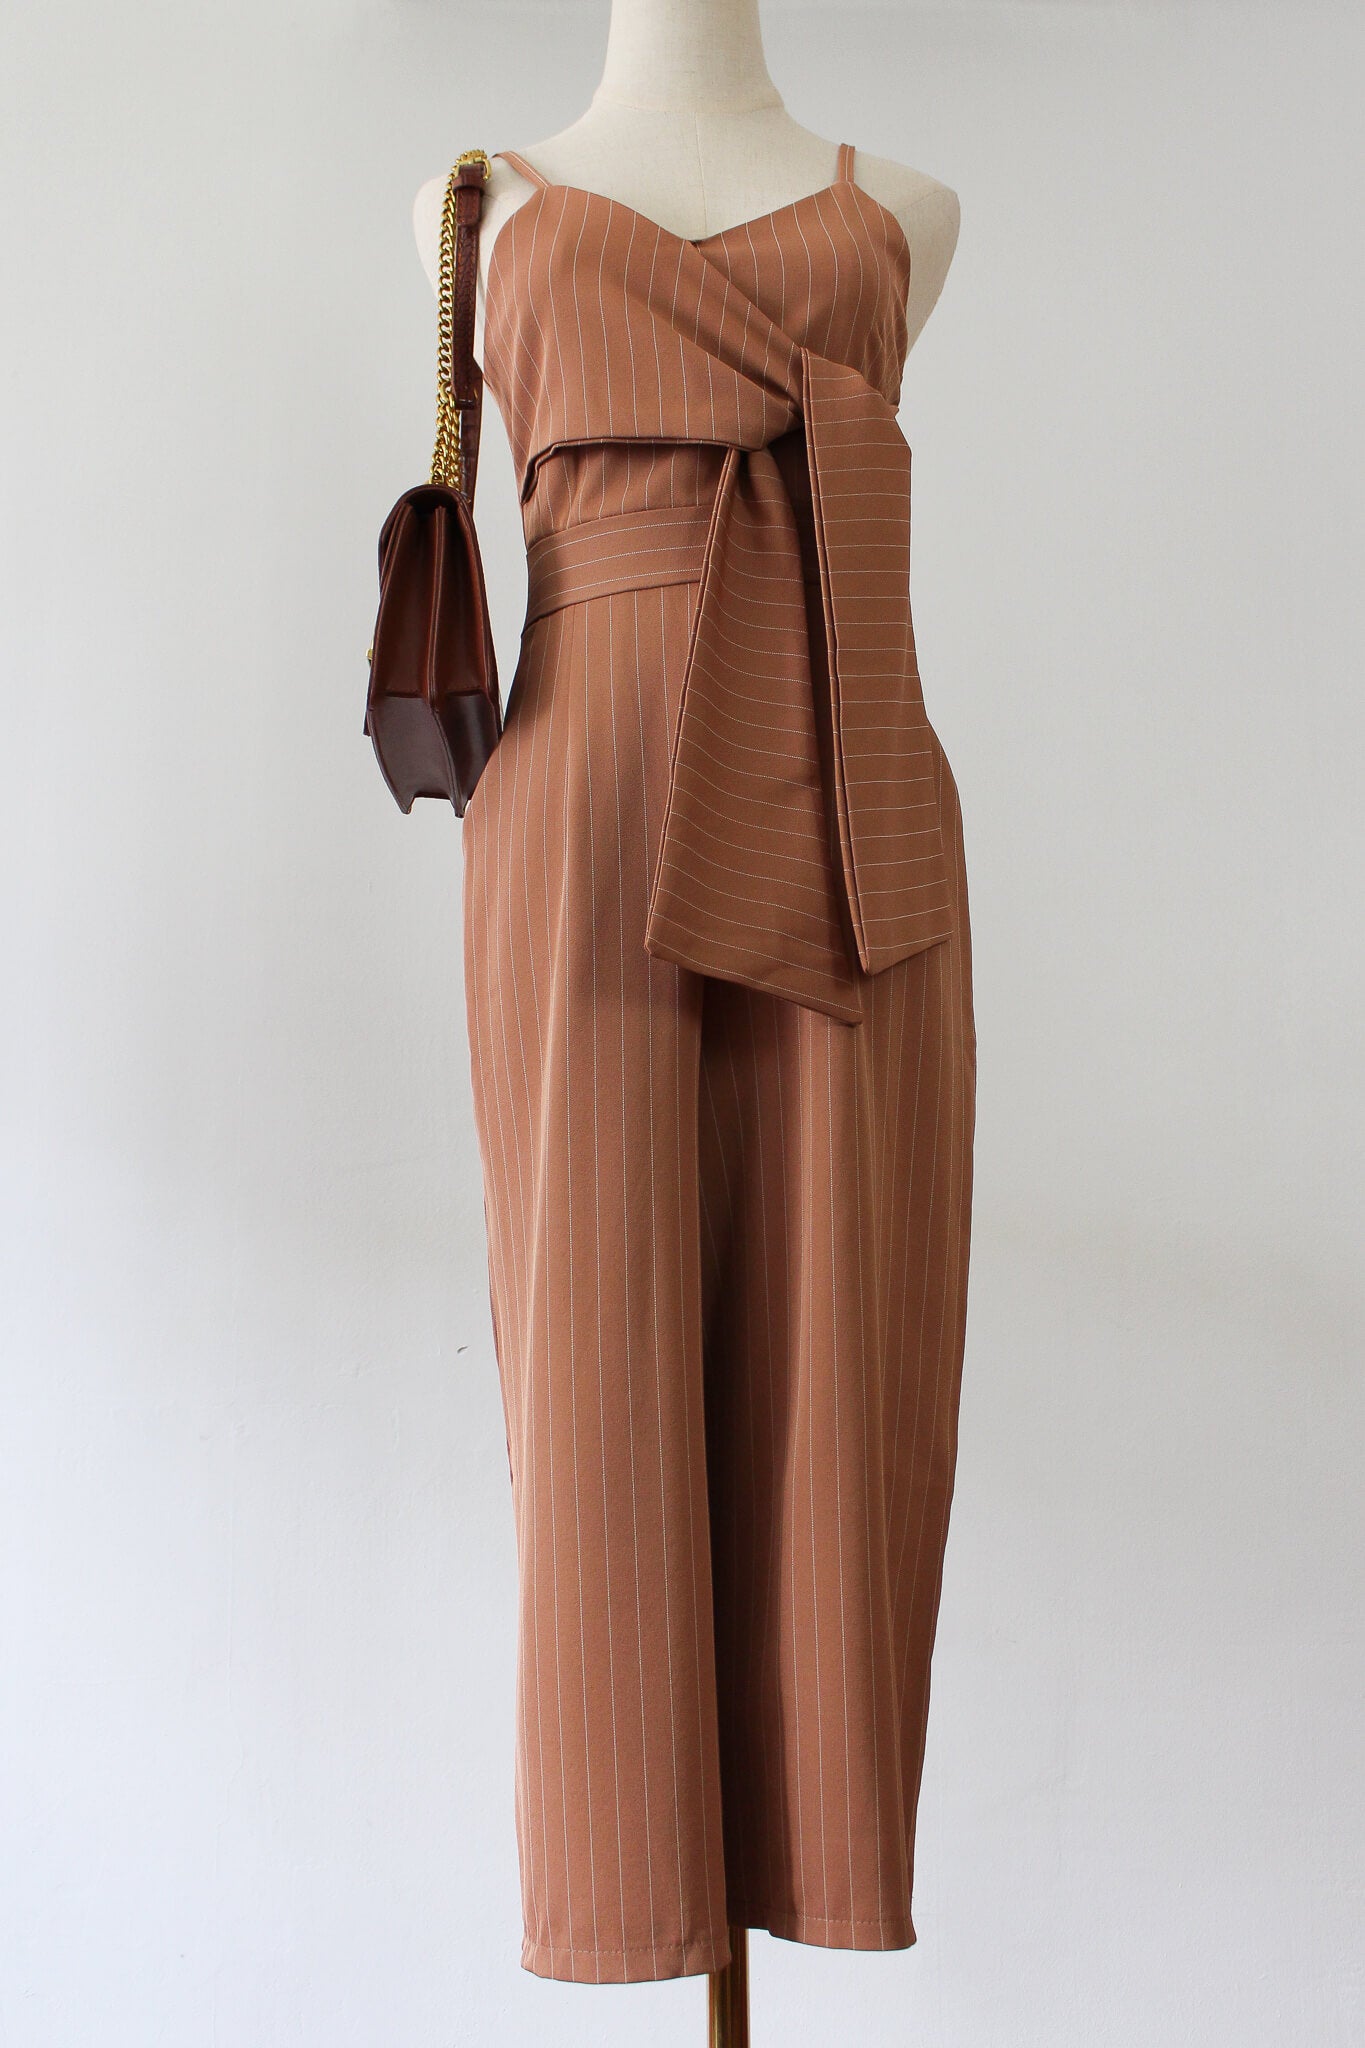 Striped jumpsuit with front twist. Perfect workwear or brunch outfit